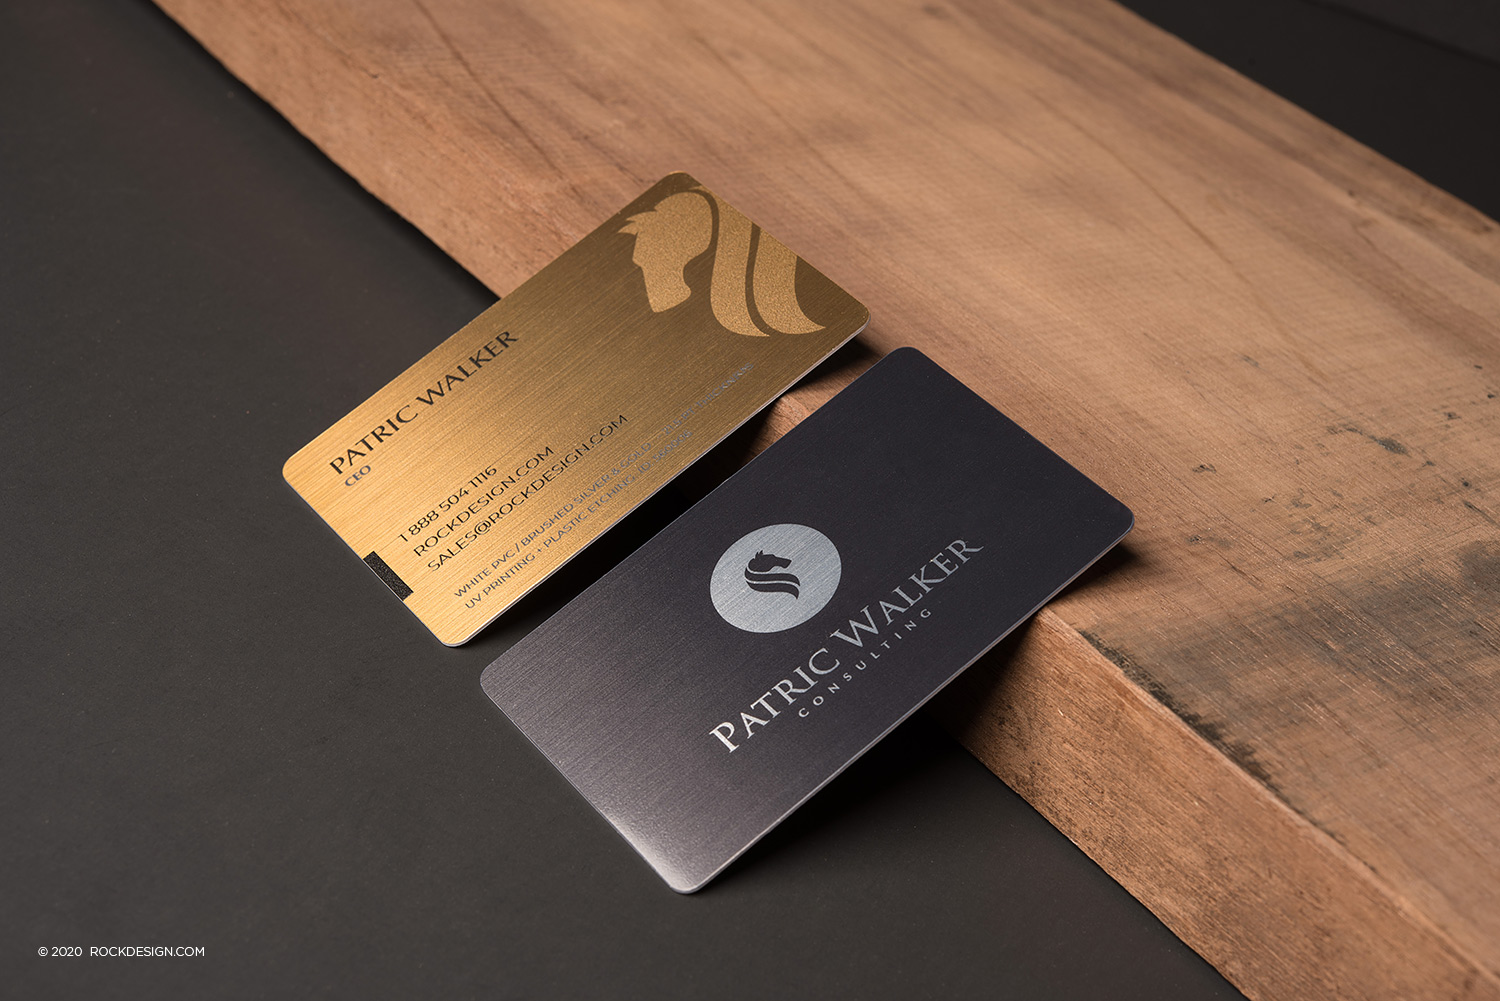 FREE ONLINE brushed metallic PVC PLASTIC business card template